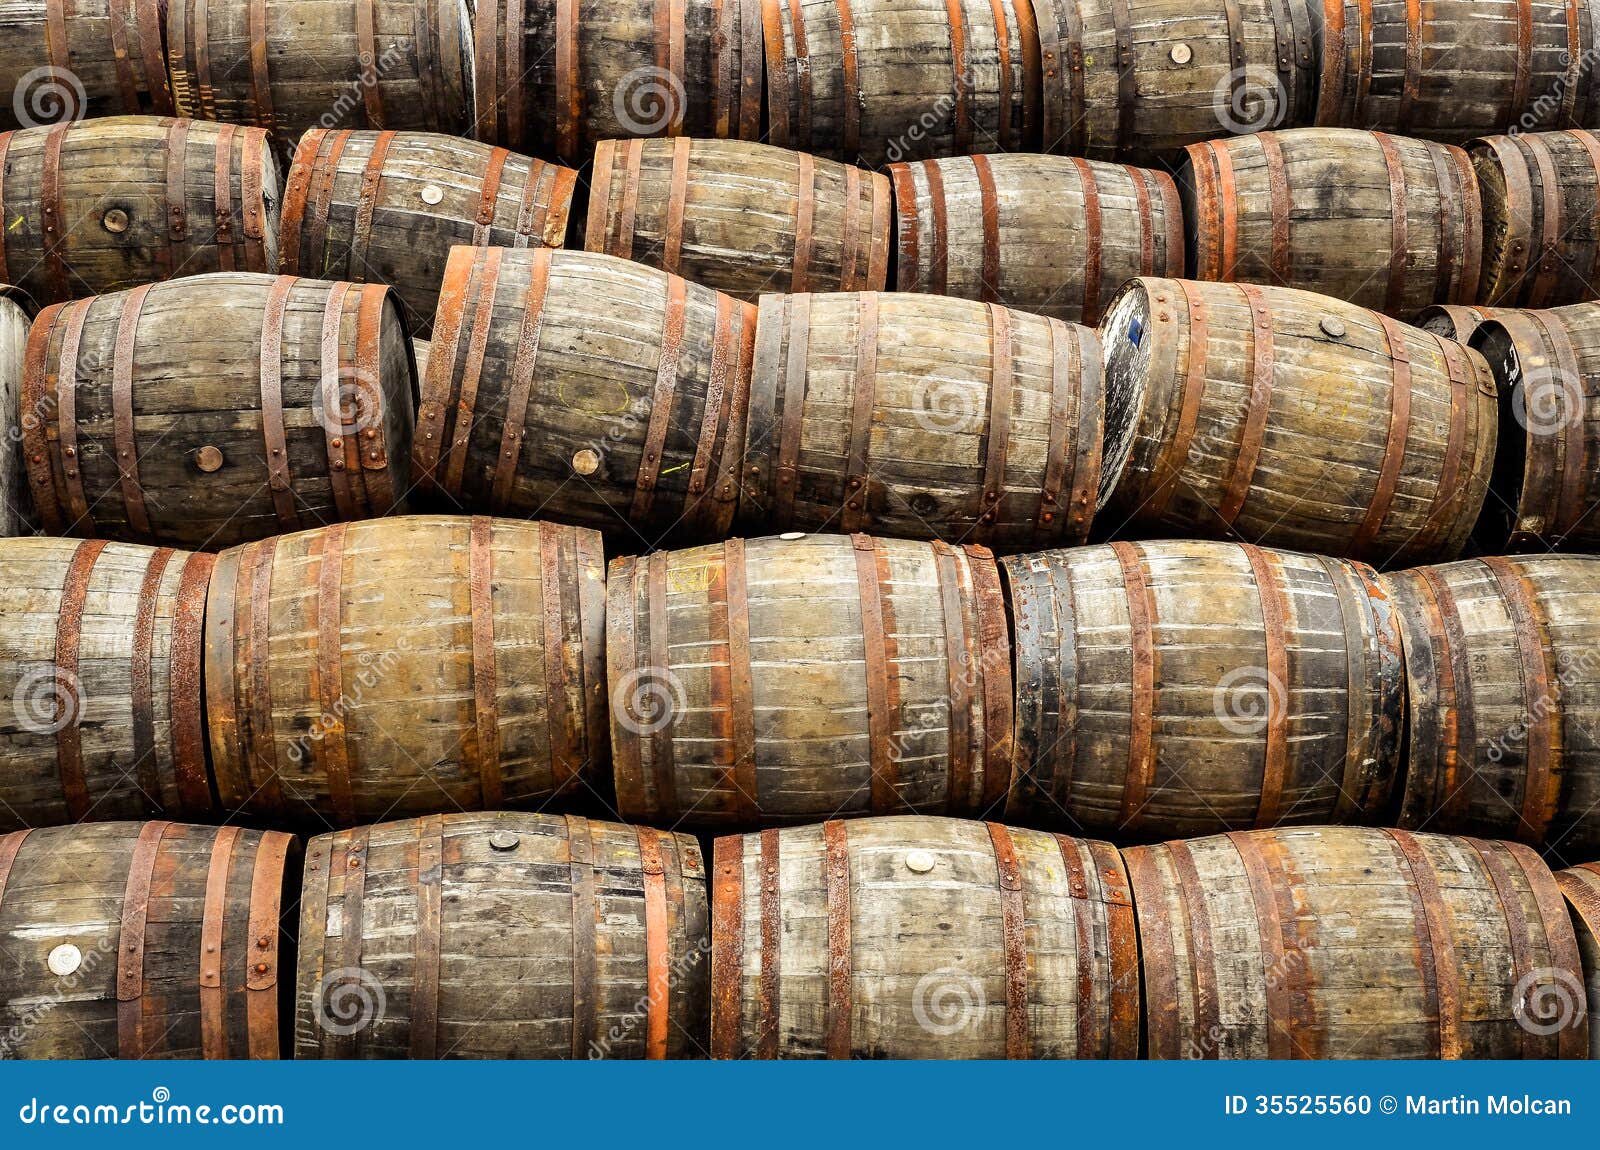 stacked pile of old whisky and wine wooden barrels